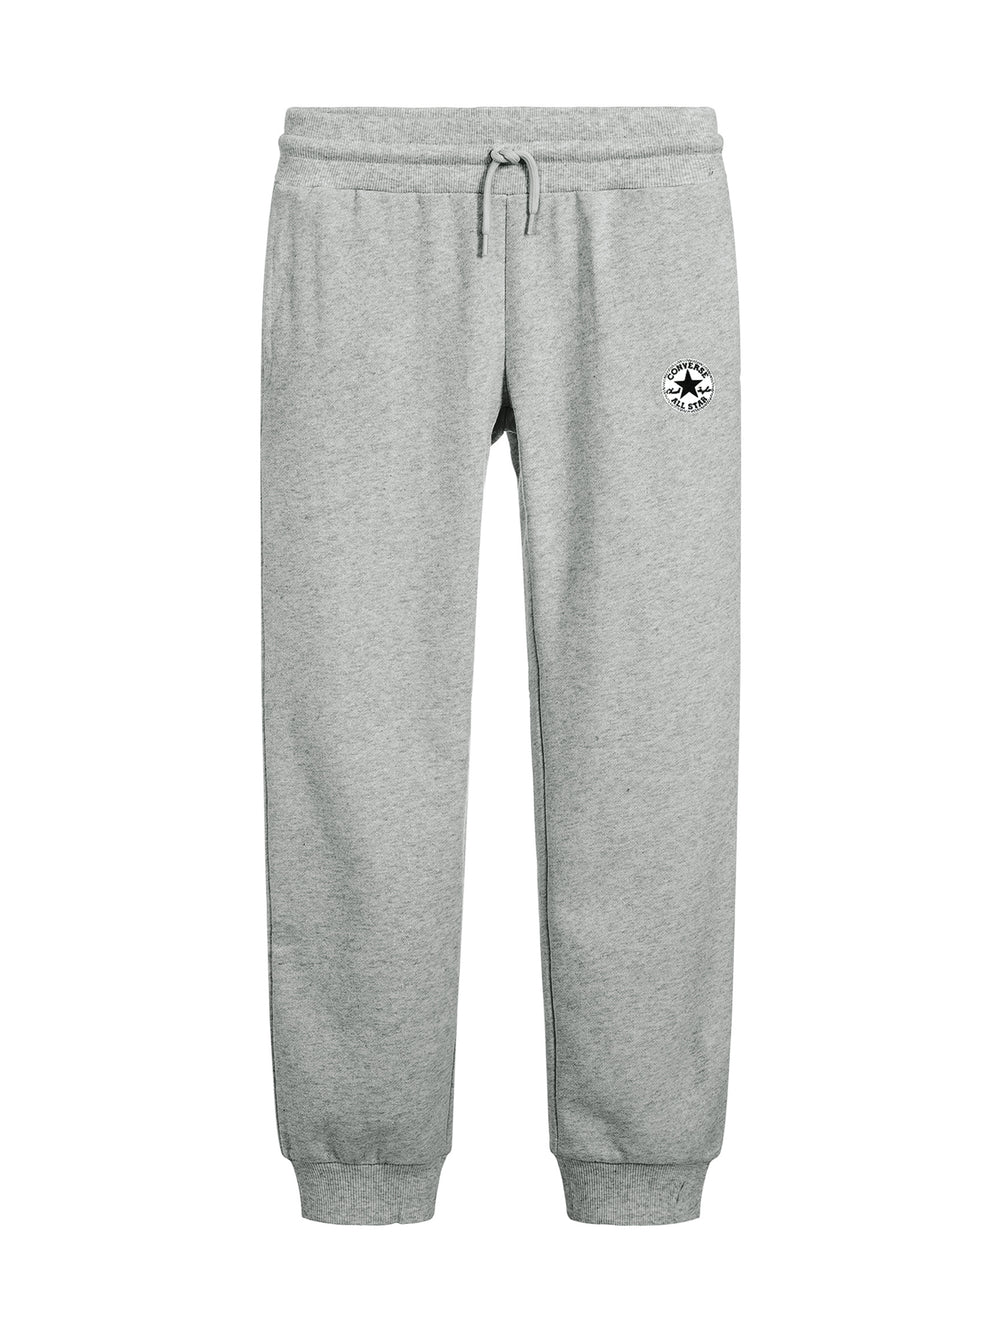 CONVERSE YOUTH BOYS SIGNATURE CHUCK PATCH JOGGER